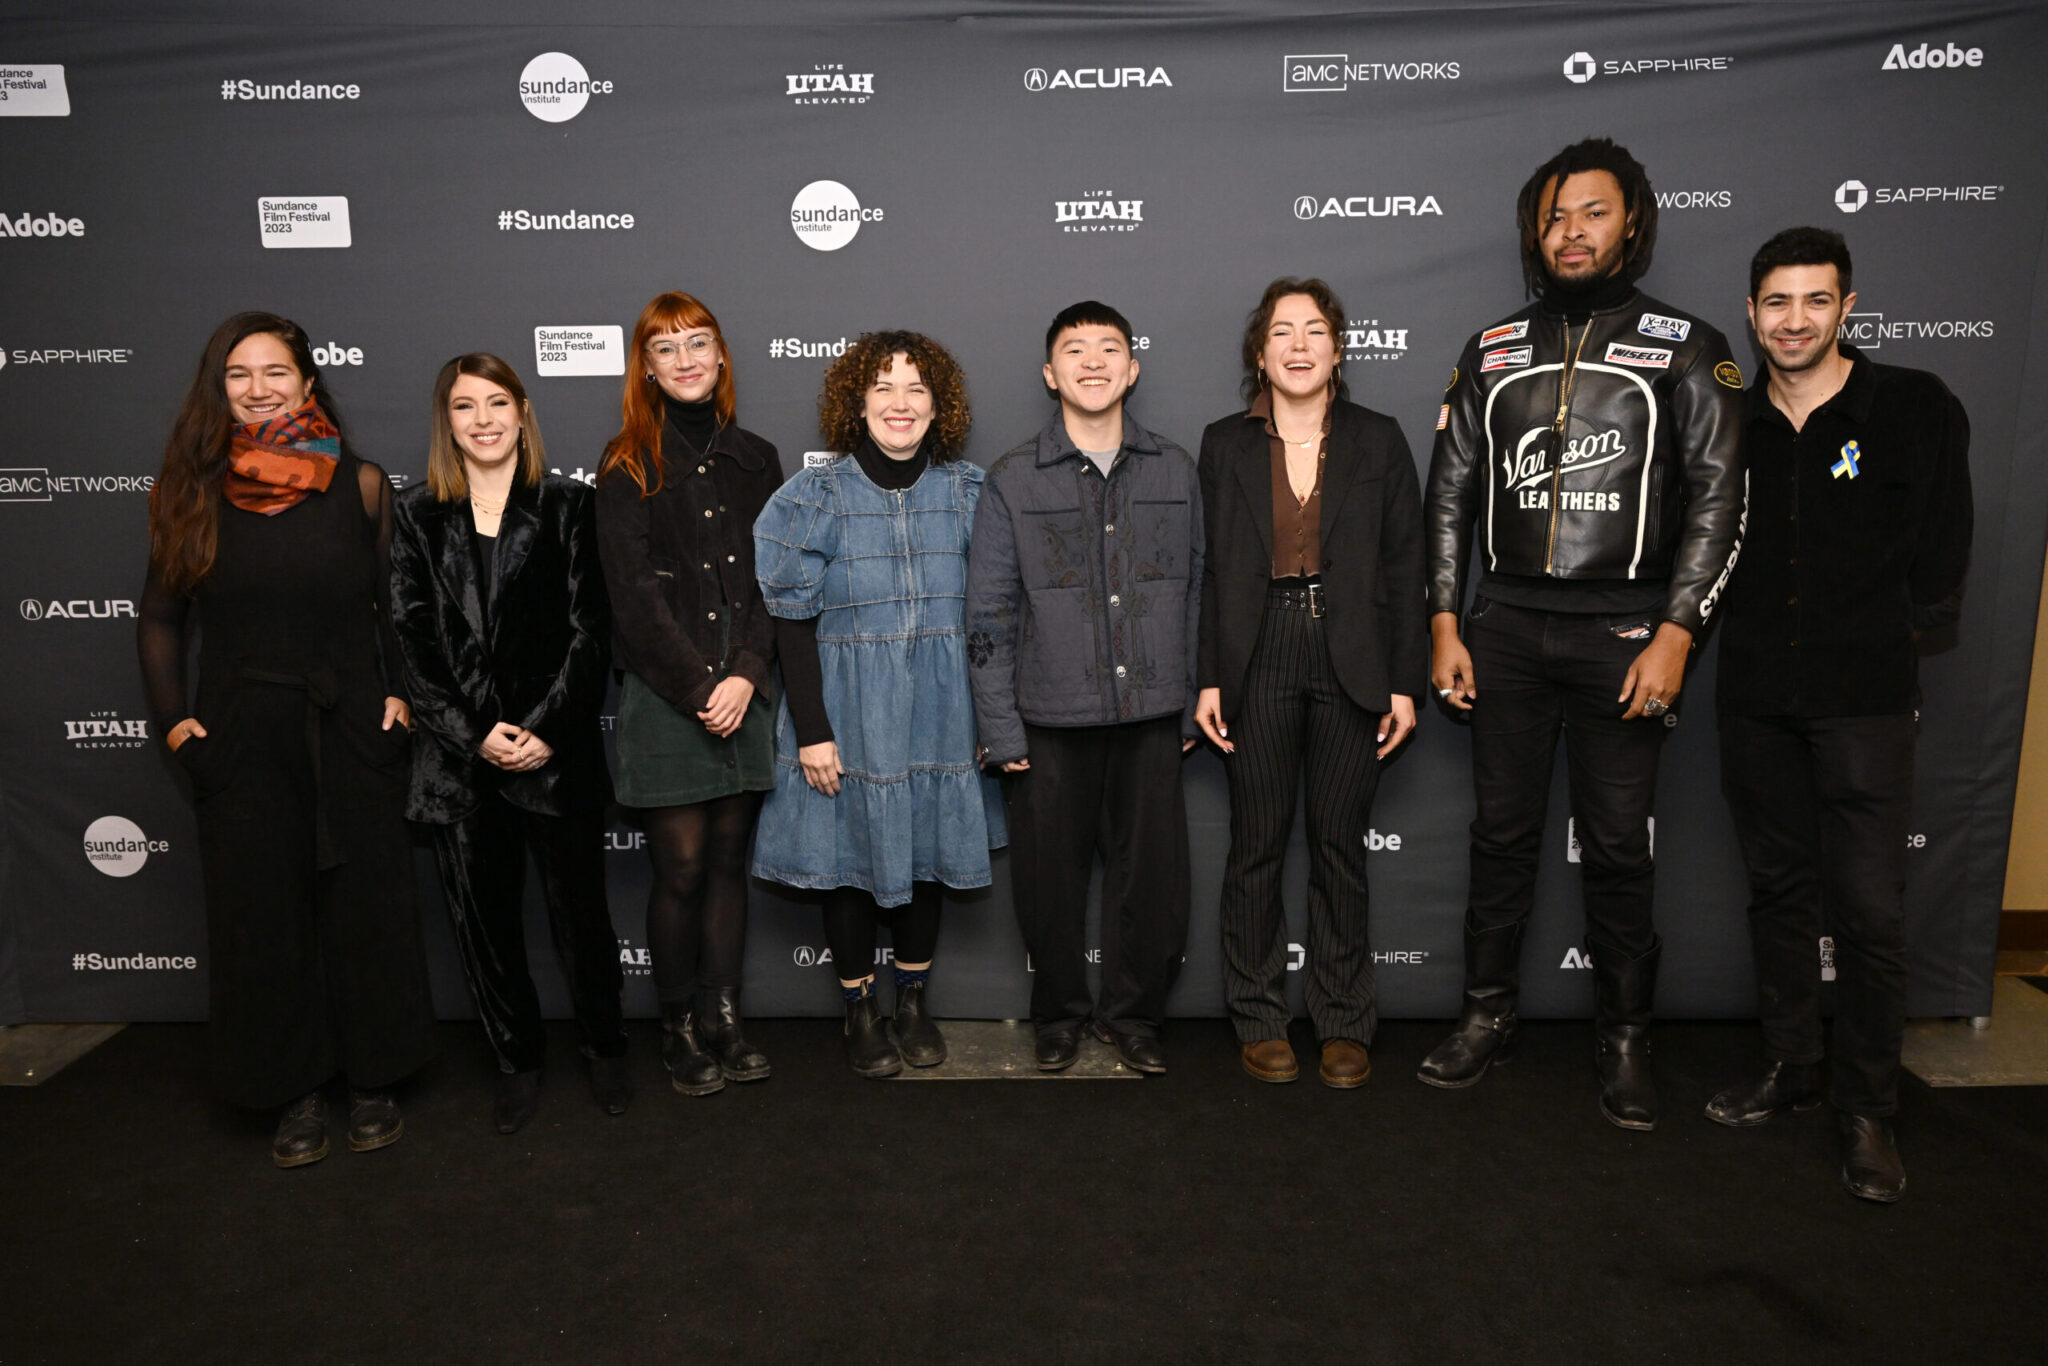 A woman with long brown hair and an orange scarf, a woman with short brown hair in all black, a woman with long red hair in a black coat, a women with brown curly hair in a denim dress, a man with short black hair and a charcoal jacket, a woman with brown hair and a black suit over a drown top, a man with black dreads in all black, a man with black hair in all black, all stand in front of a stand and repeat at the 2023 Sundance Film Festival.